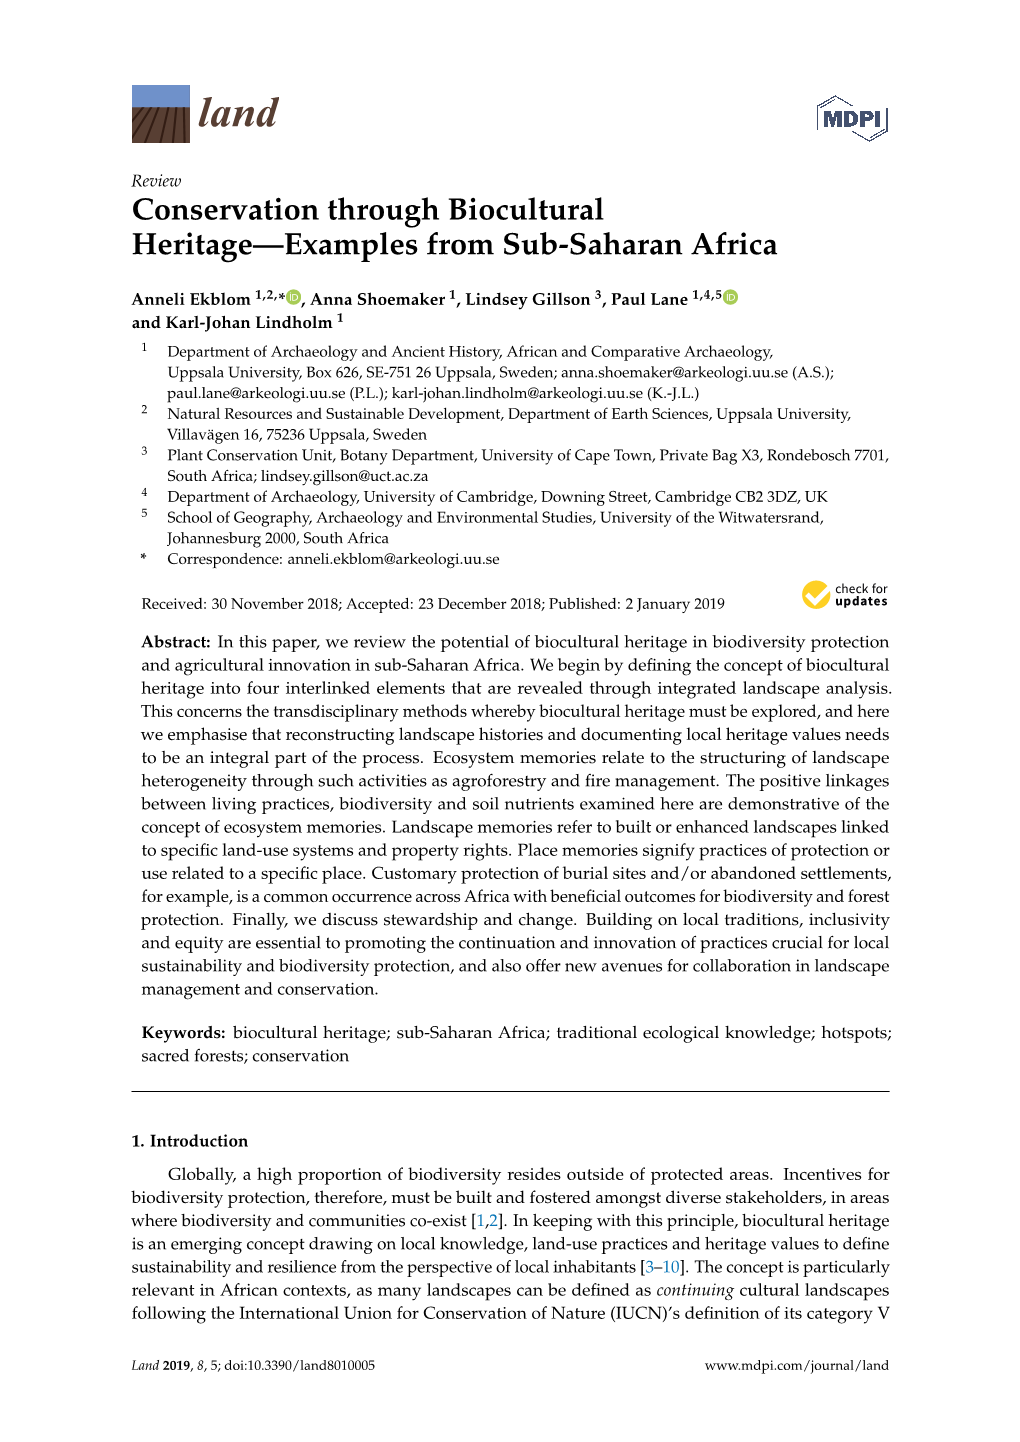 Conservation Through Biocultural Heritage—Examples from Sub-Saharan Africa